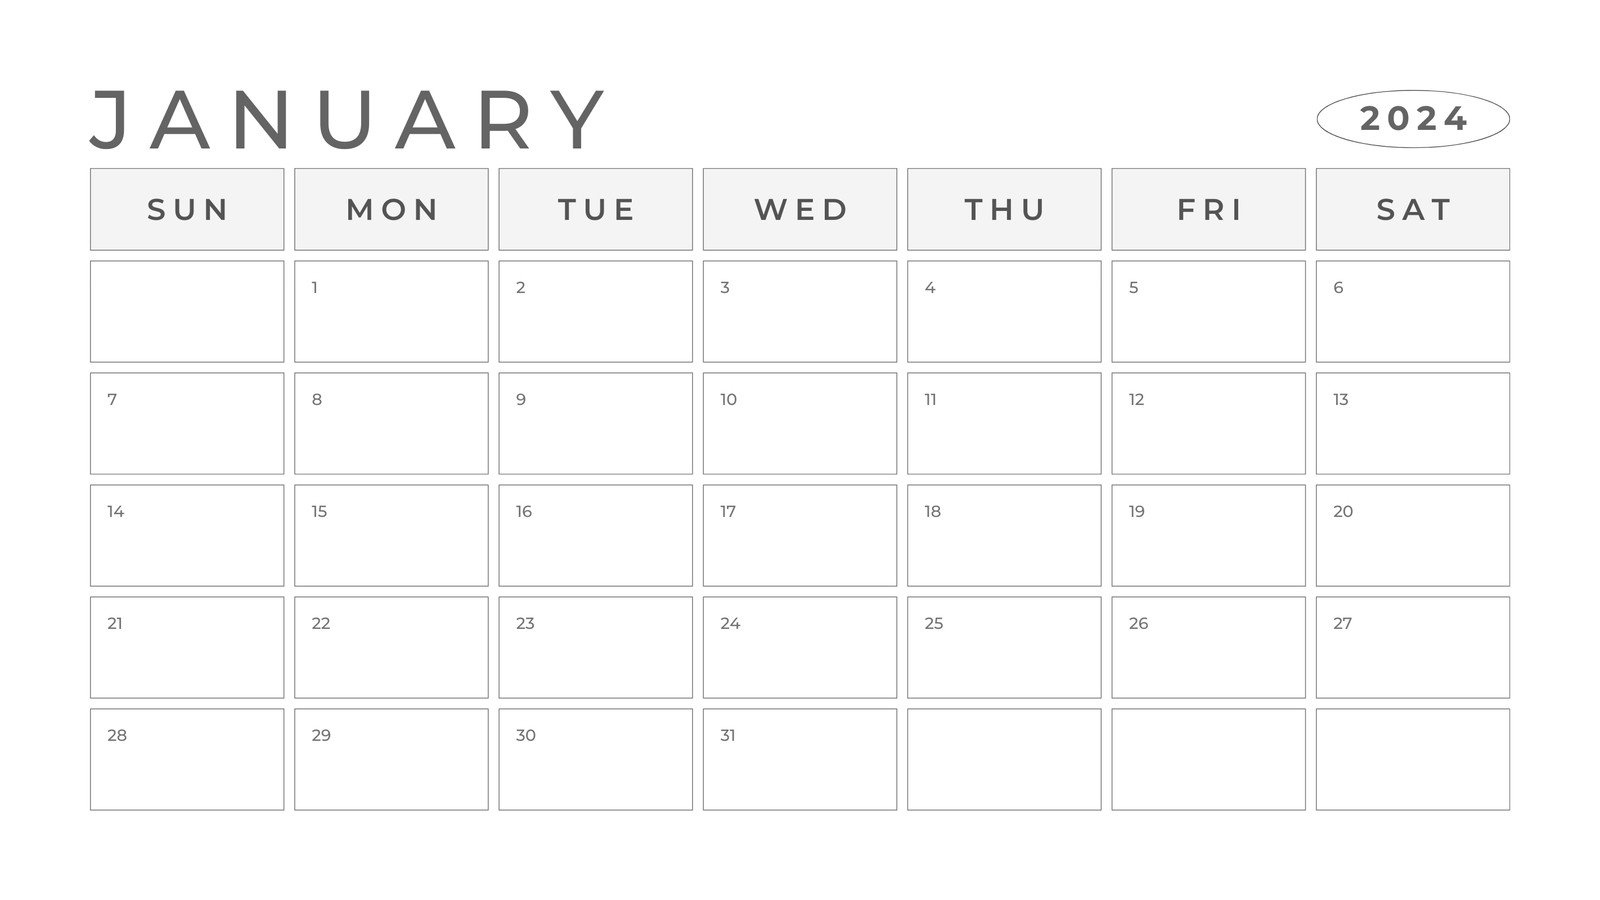 Free And Customizable Calendar Templates | Canva intended for Free Printable Calendar 2024 That I Can Edit